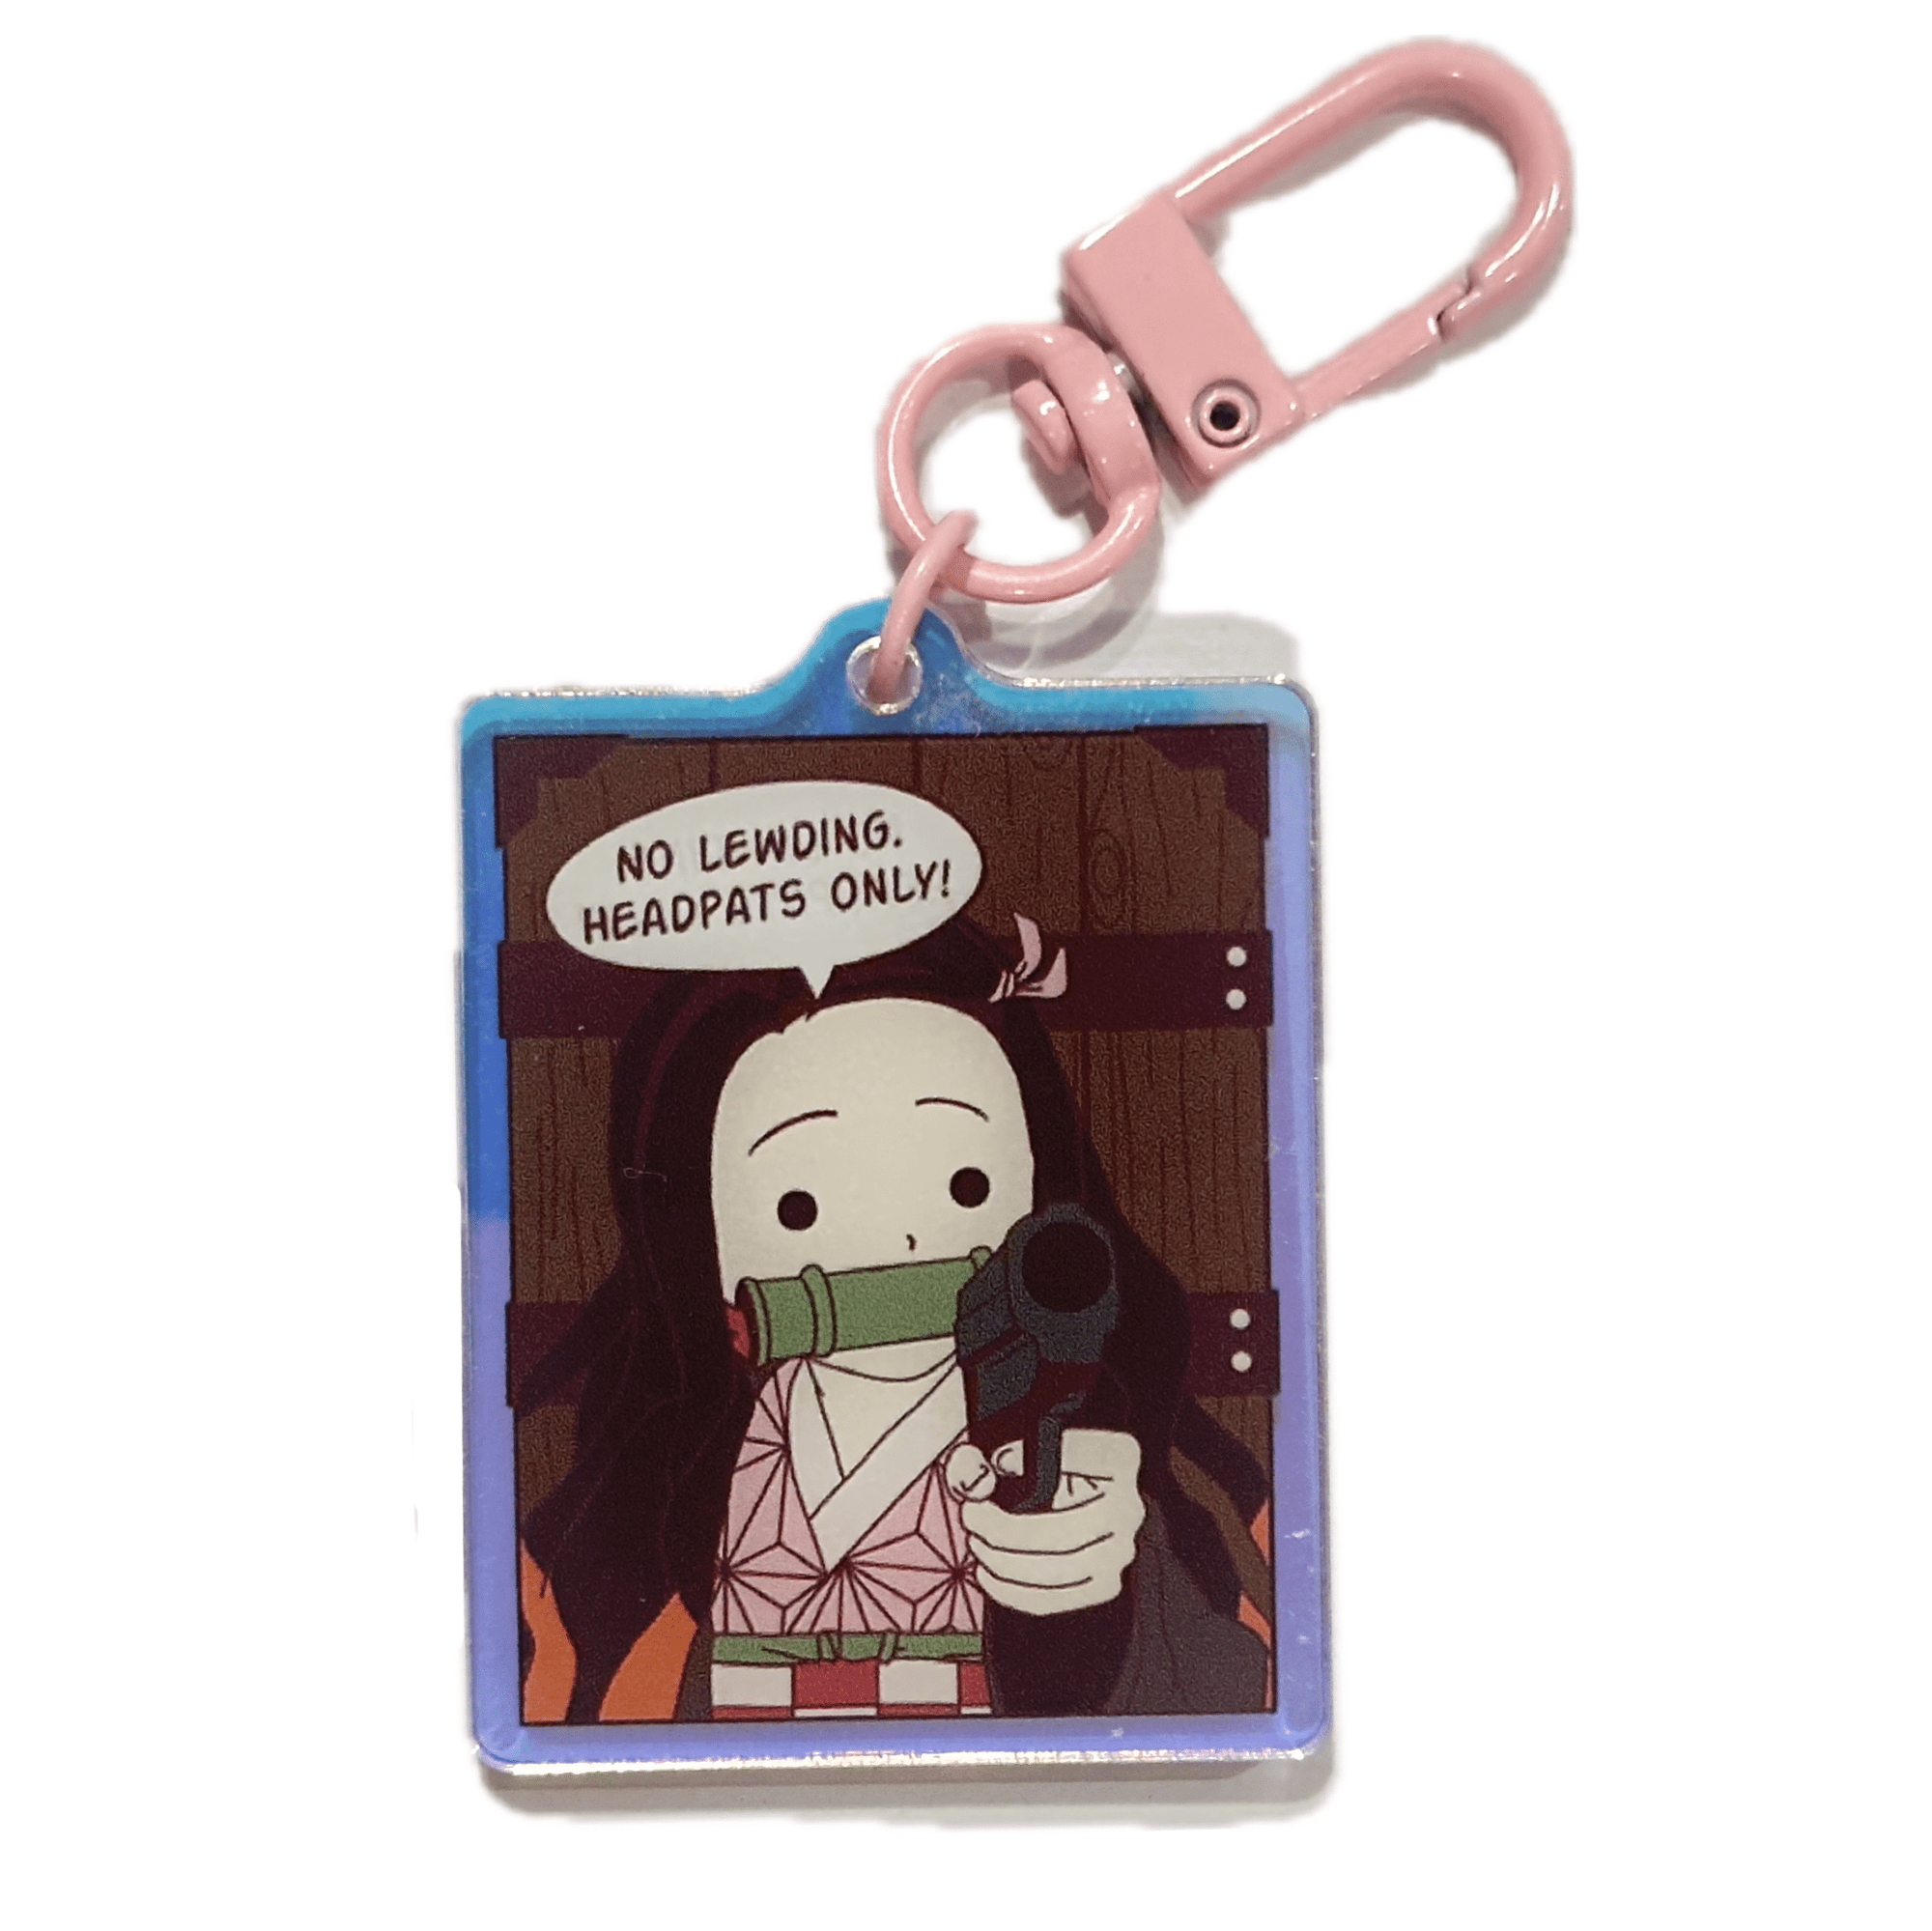 Pinbuds Charms & Keychains No Lewding headpats only acrylic charm keychain